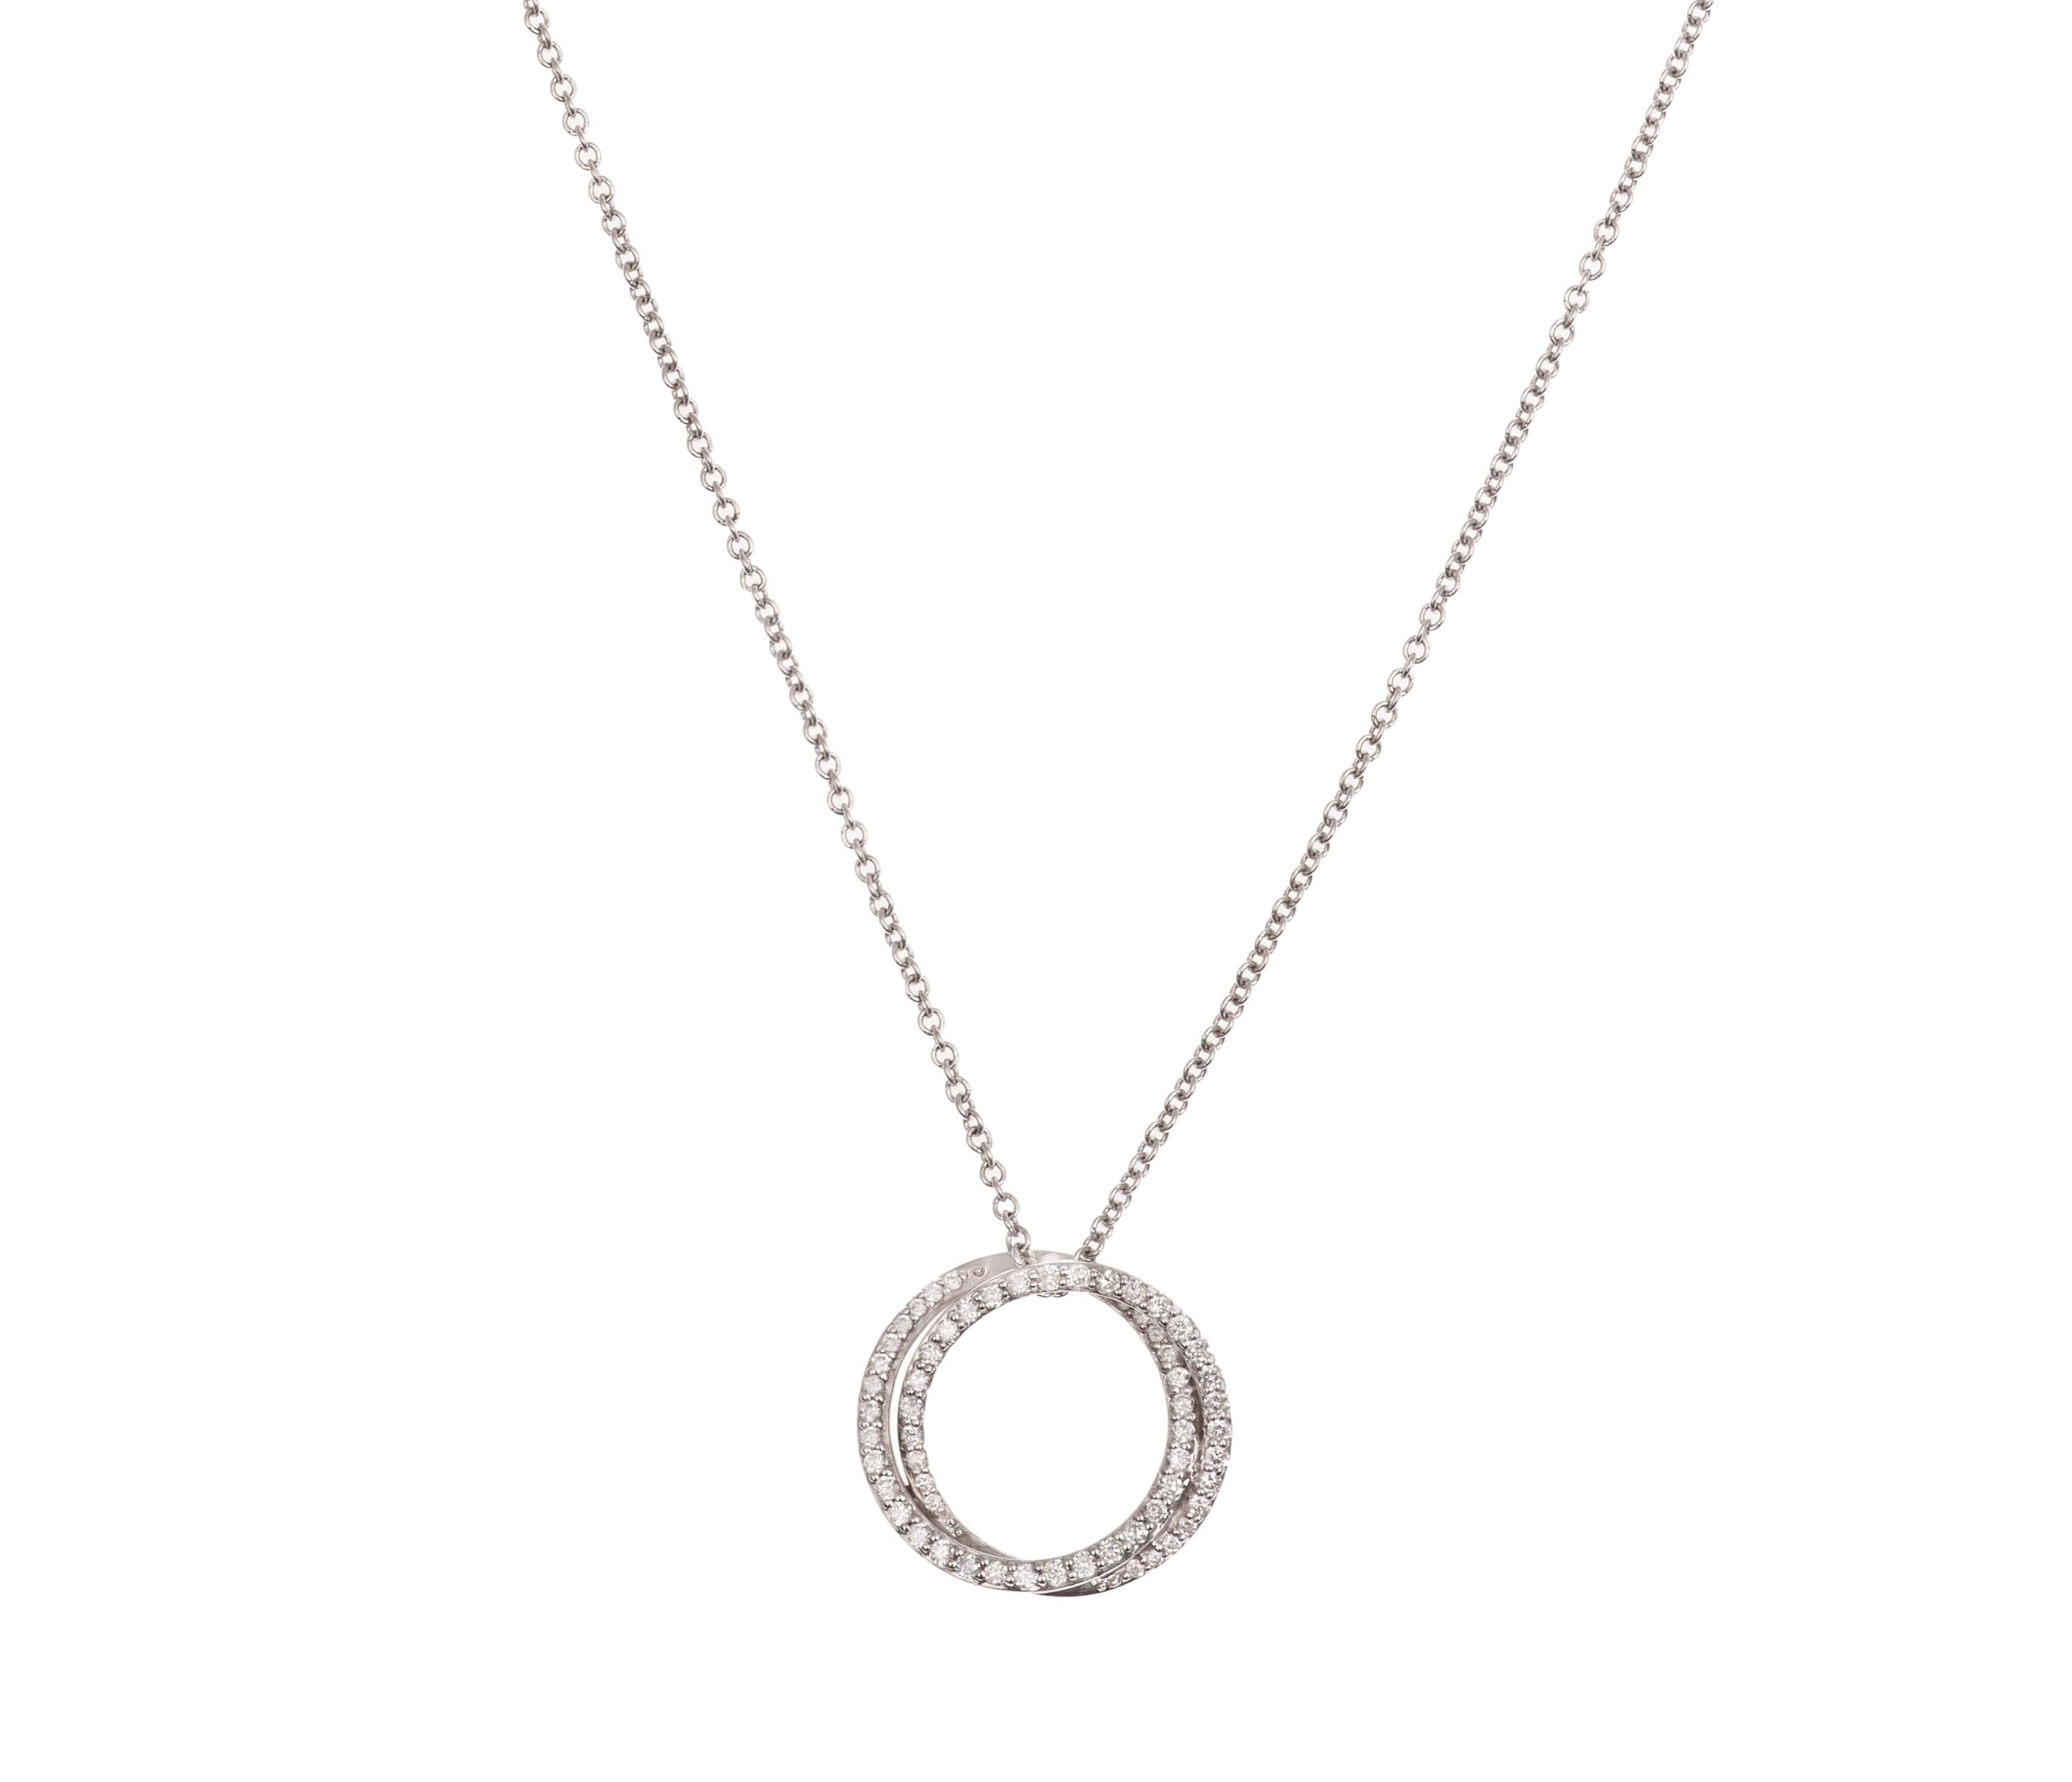 A fine and elegant necklace presenting a double circle paved with diamonds.

18K white gold 750 / 1000th (eagle’s head hallmark)

Diamonds weight 0.31 carats.

Diameter 17 mm

Length: 42 cm